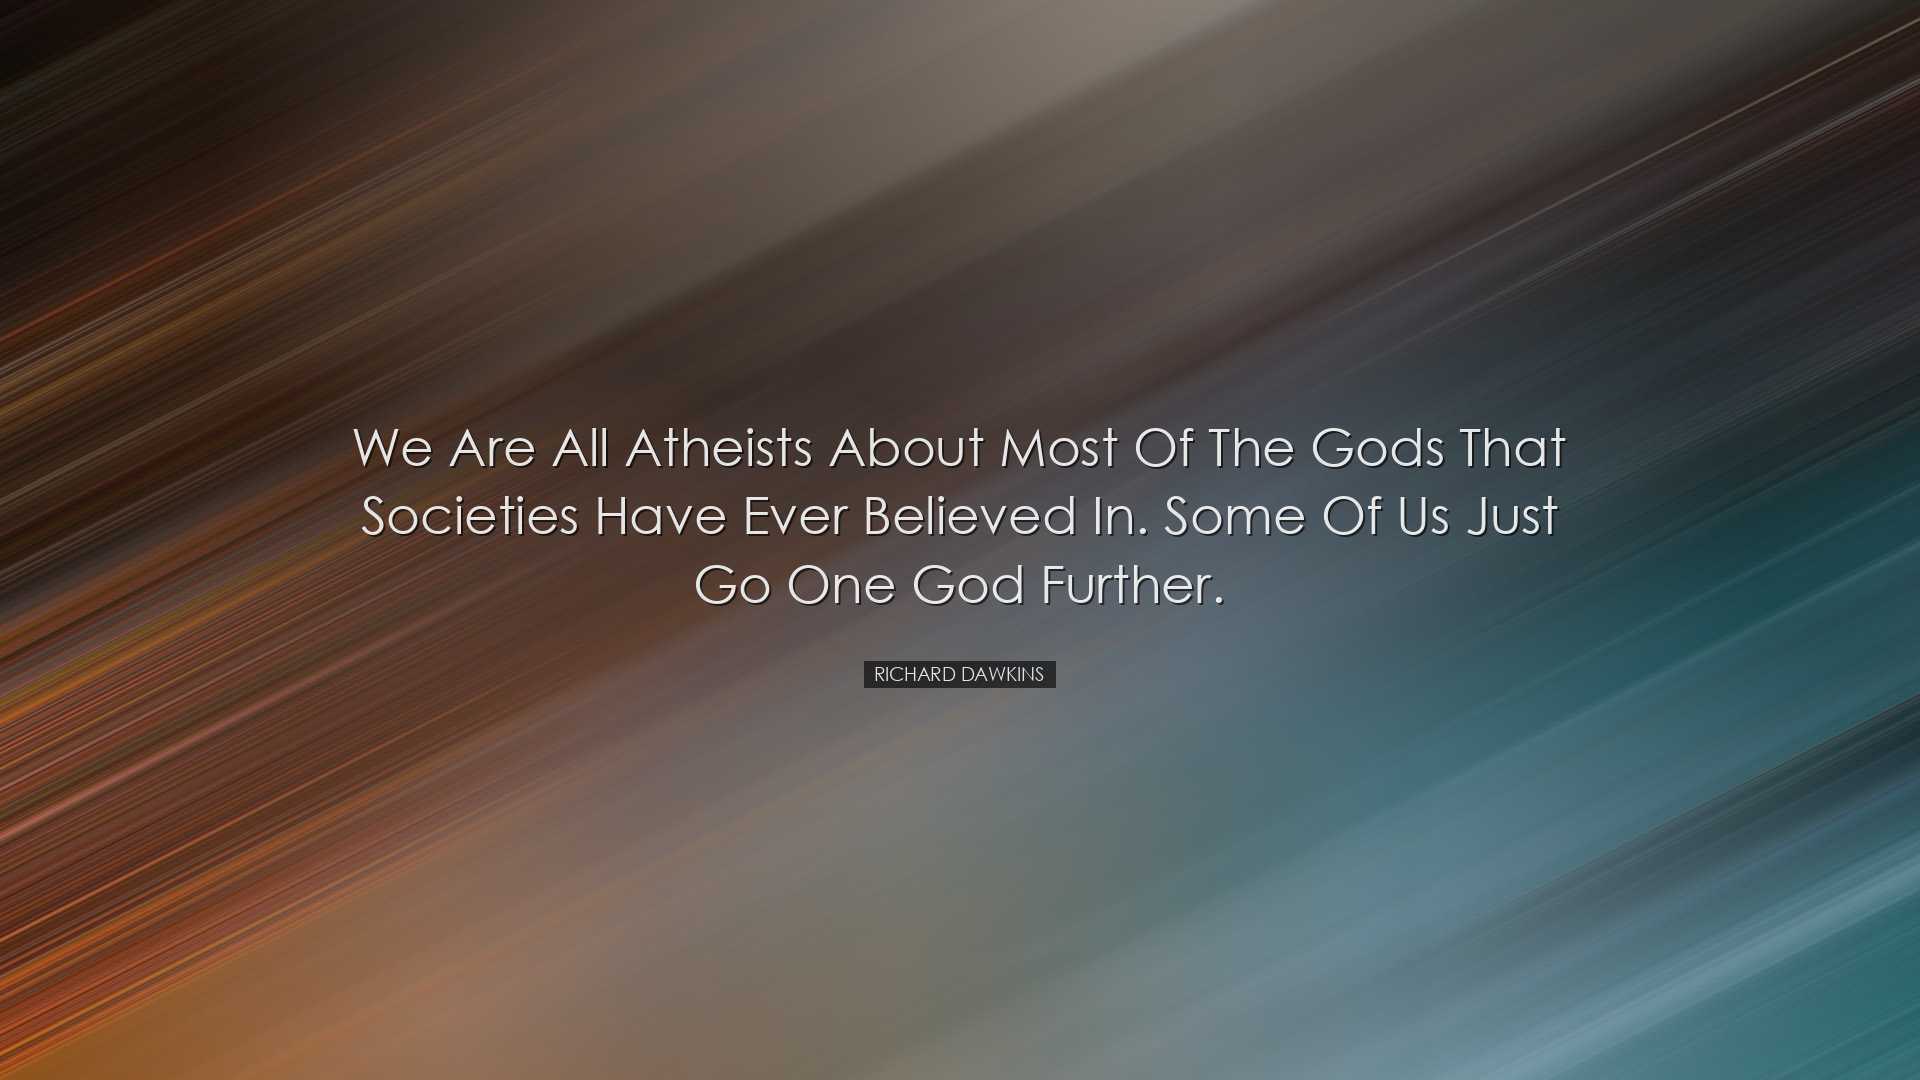 We are all atheists about most of the gods that societies have eve